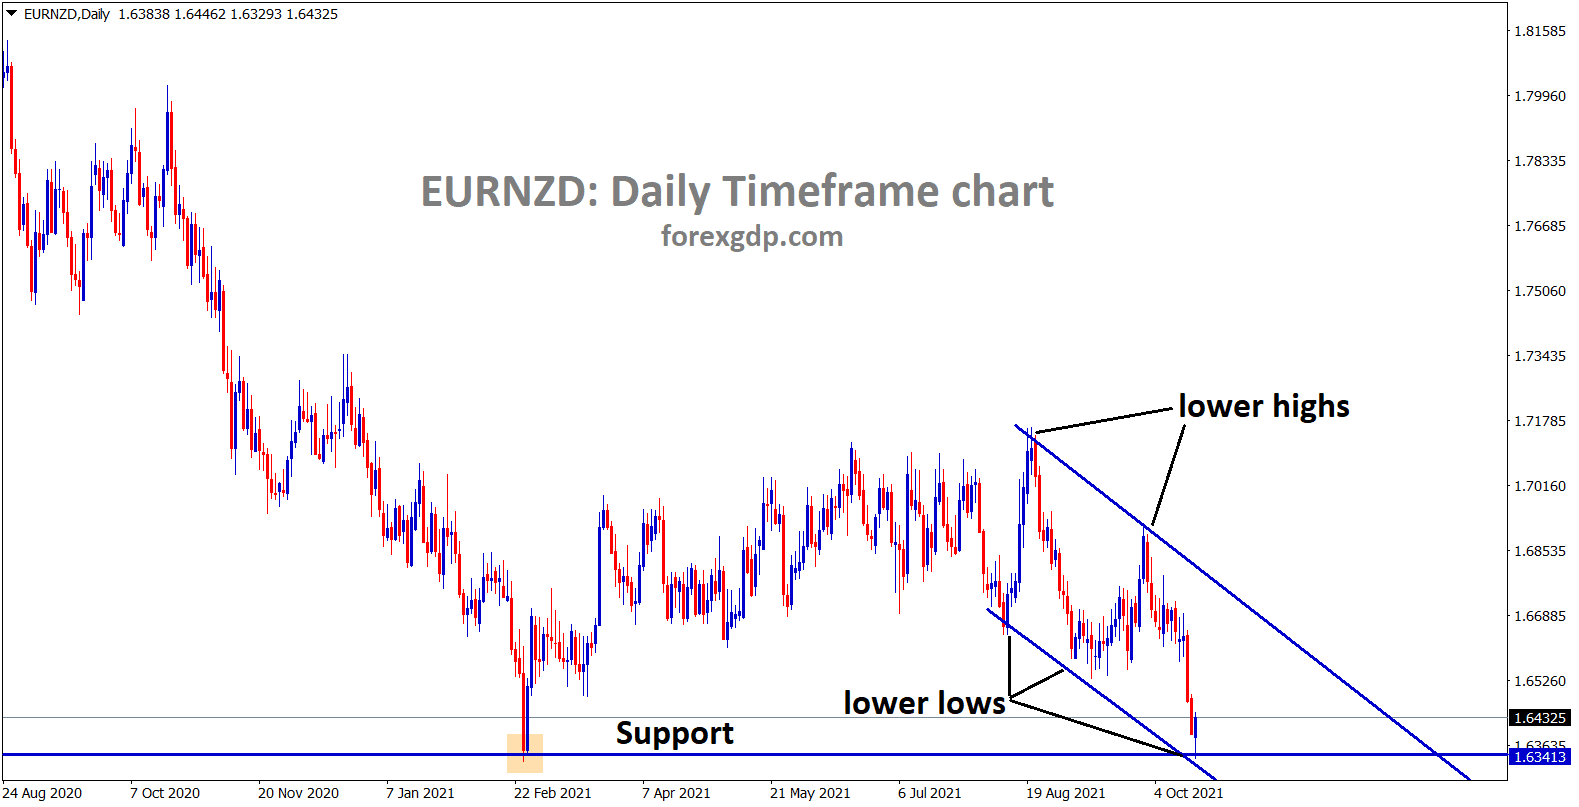 EURNZD is rebounding from the lower low and the horizontal support area